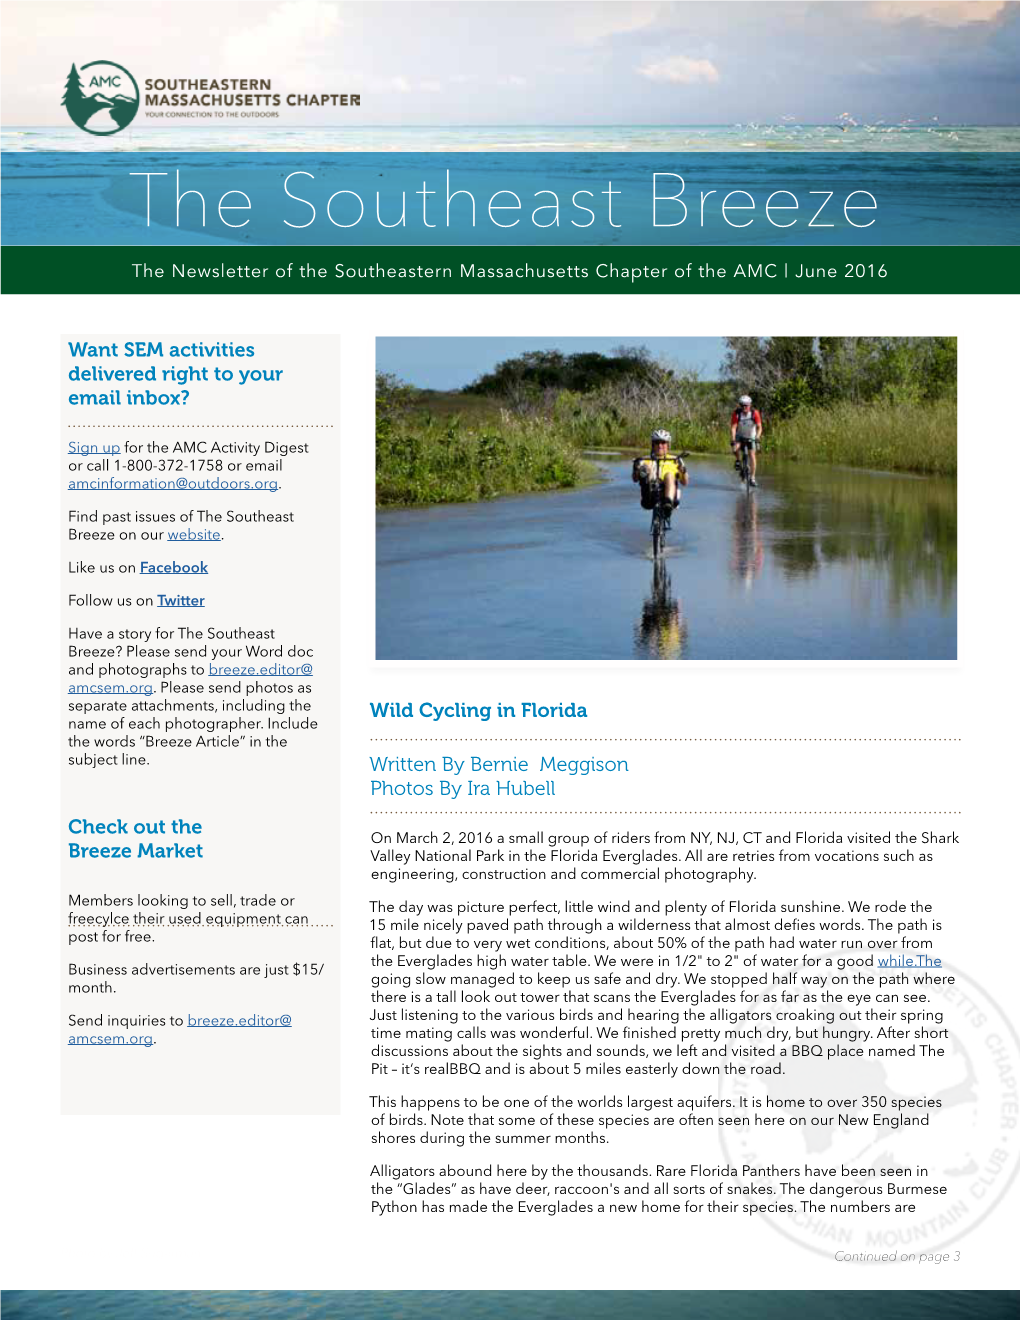 The Southeast Breeze the Newsletter of the Southeastern Massachusetts Chapter of the AMC | June 2016